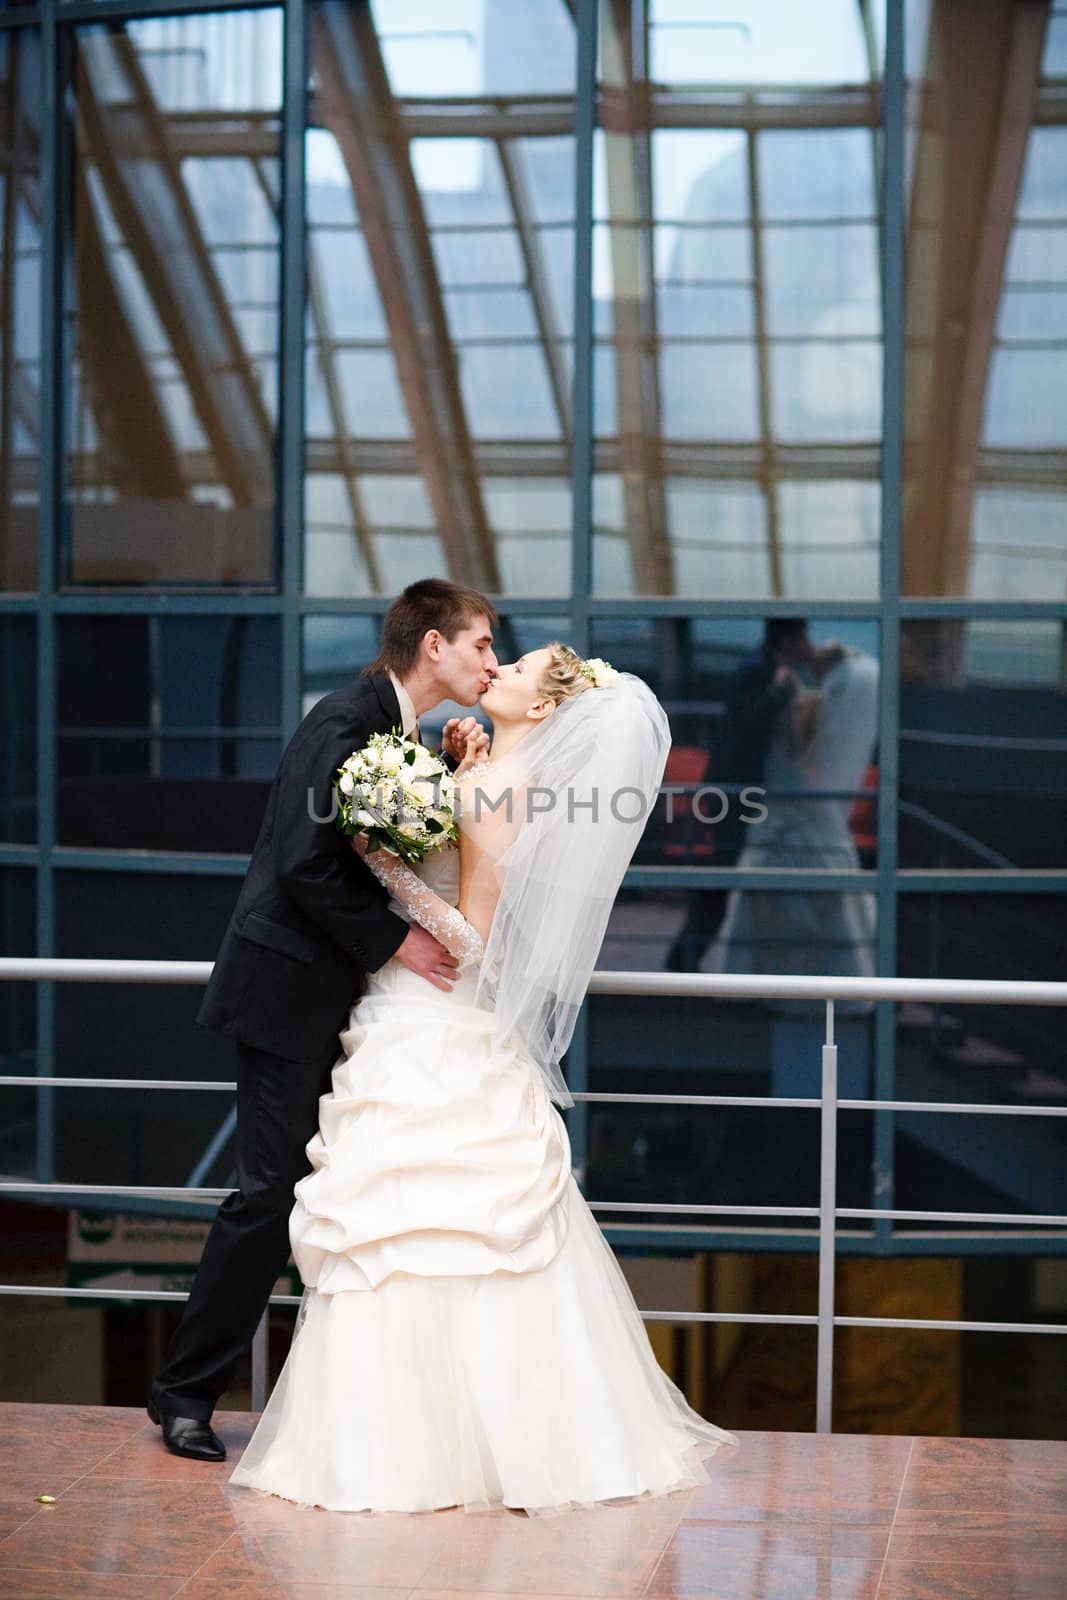 kiss of bride and groom by vsurkov